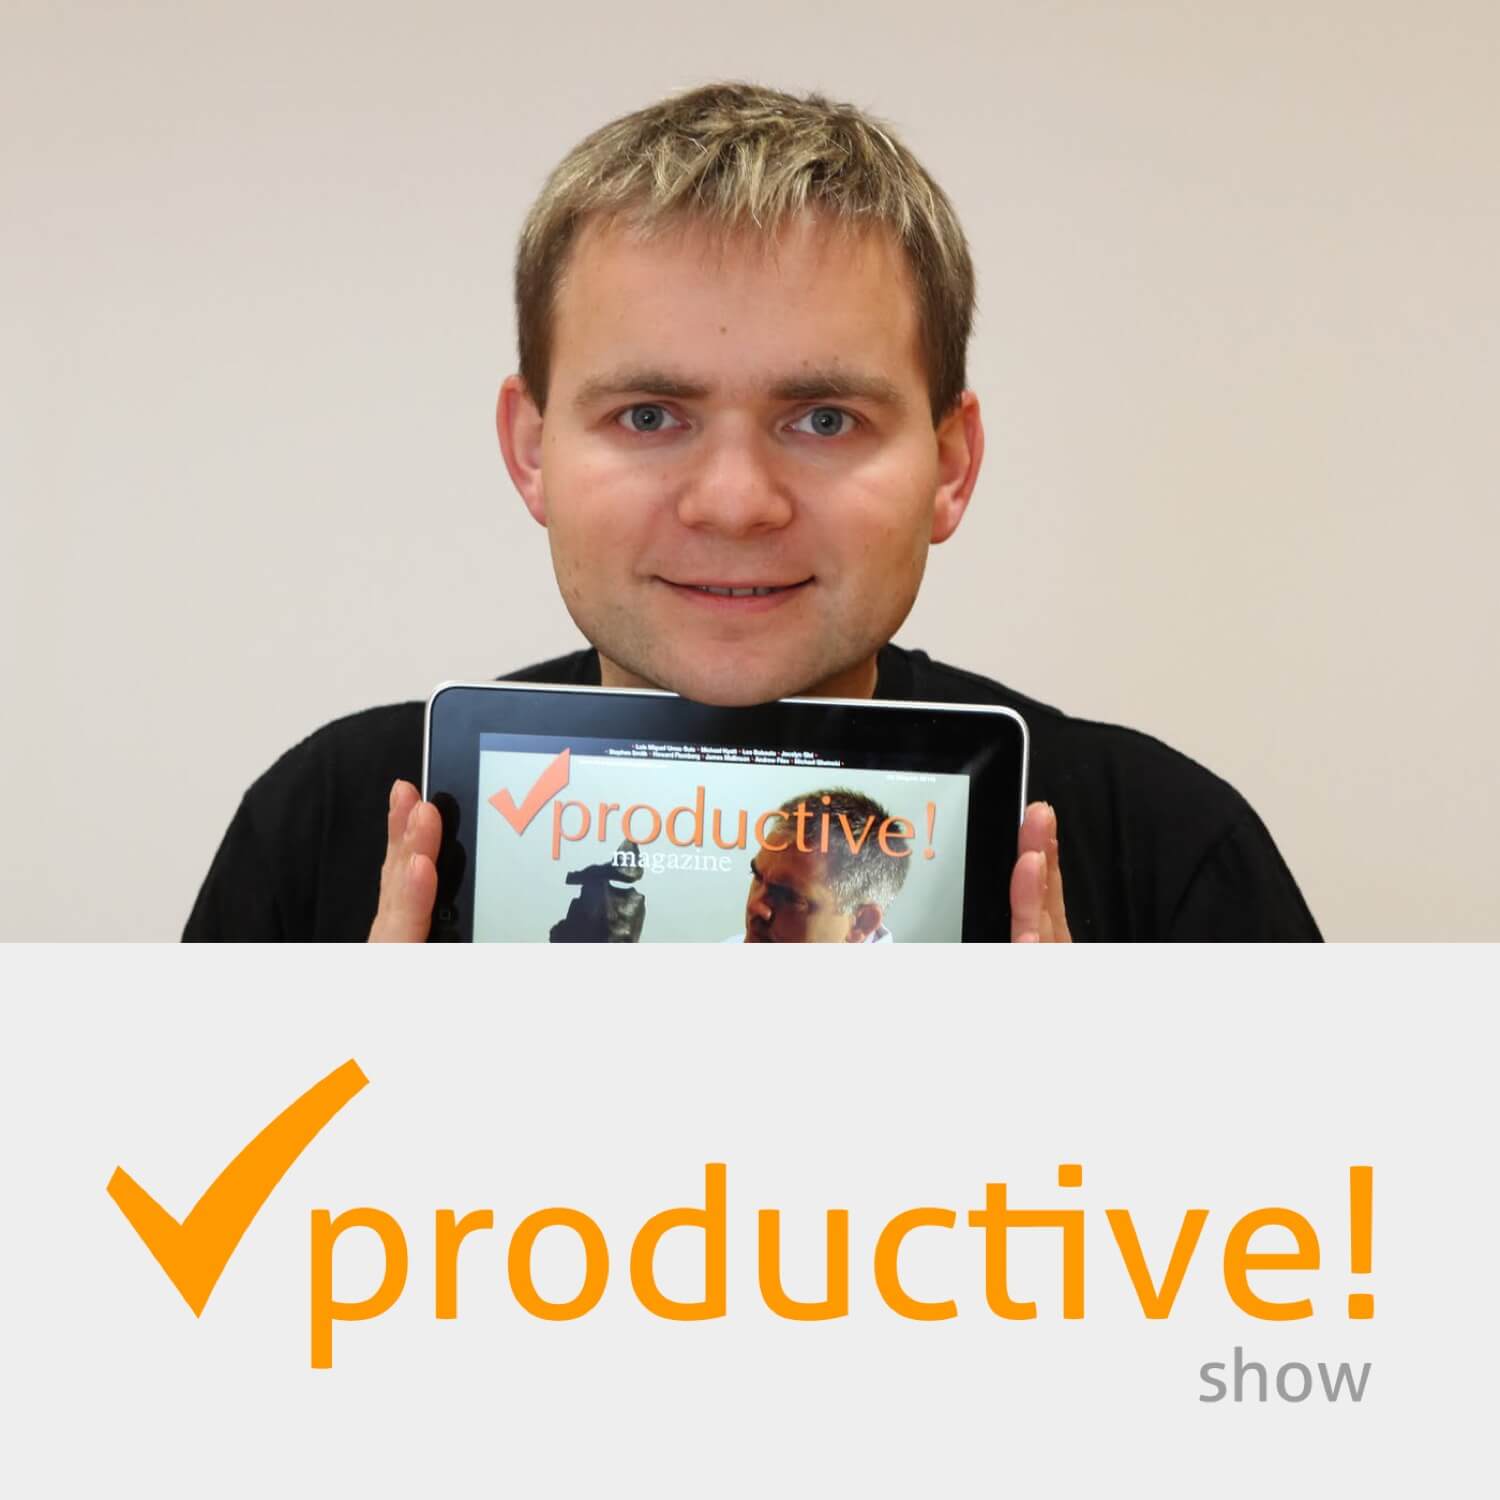 Re-discovering productivity-boosting podcasting